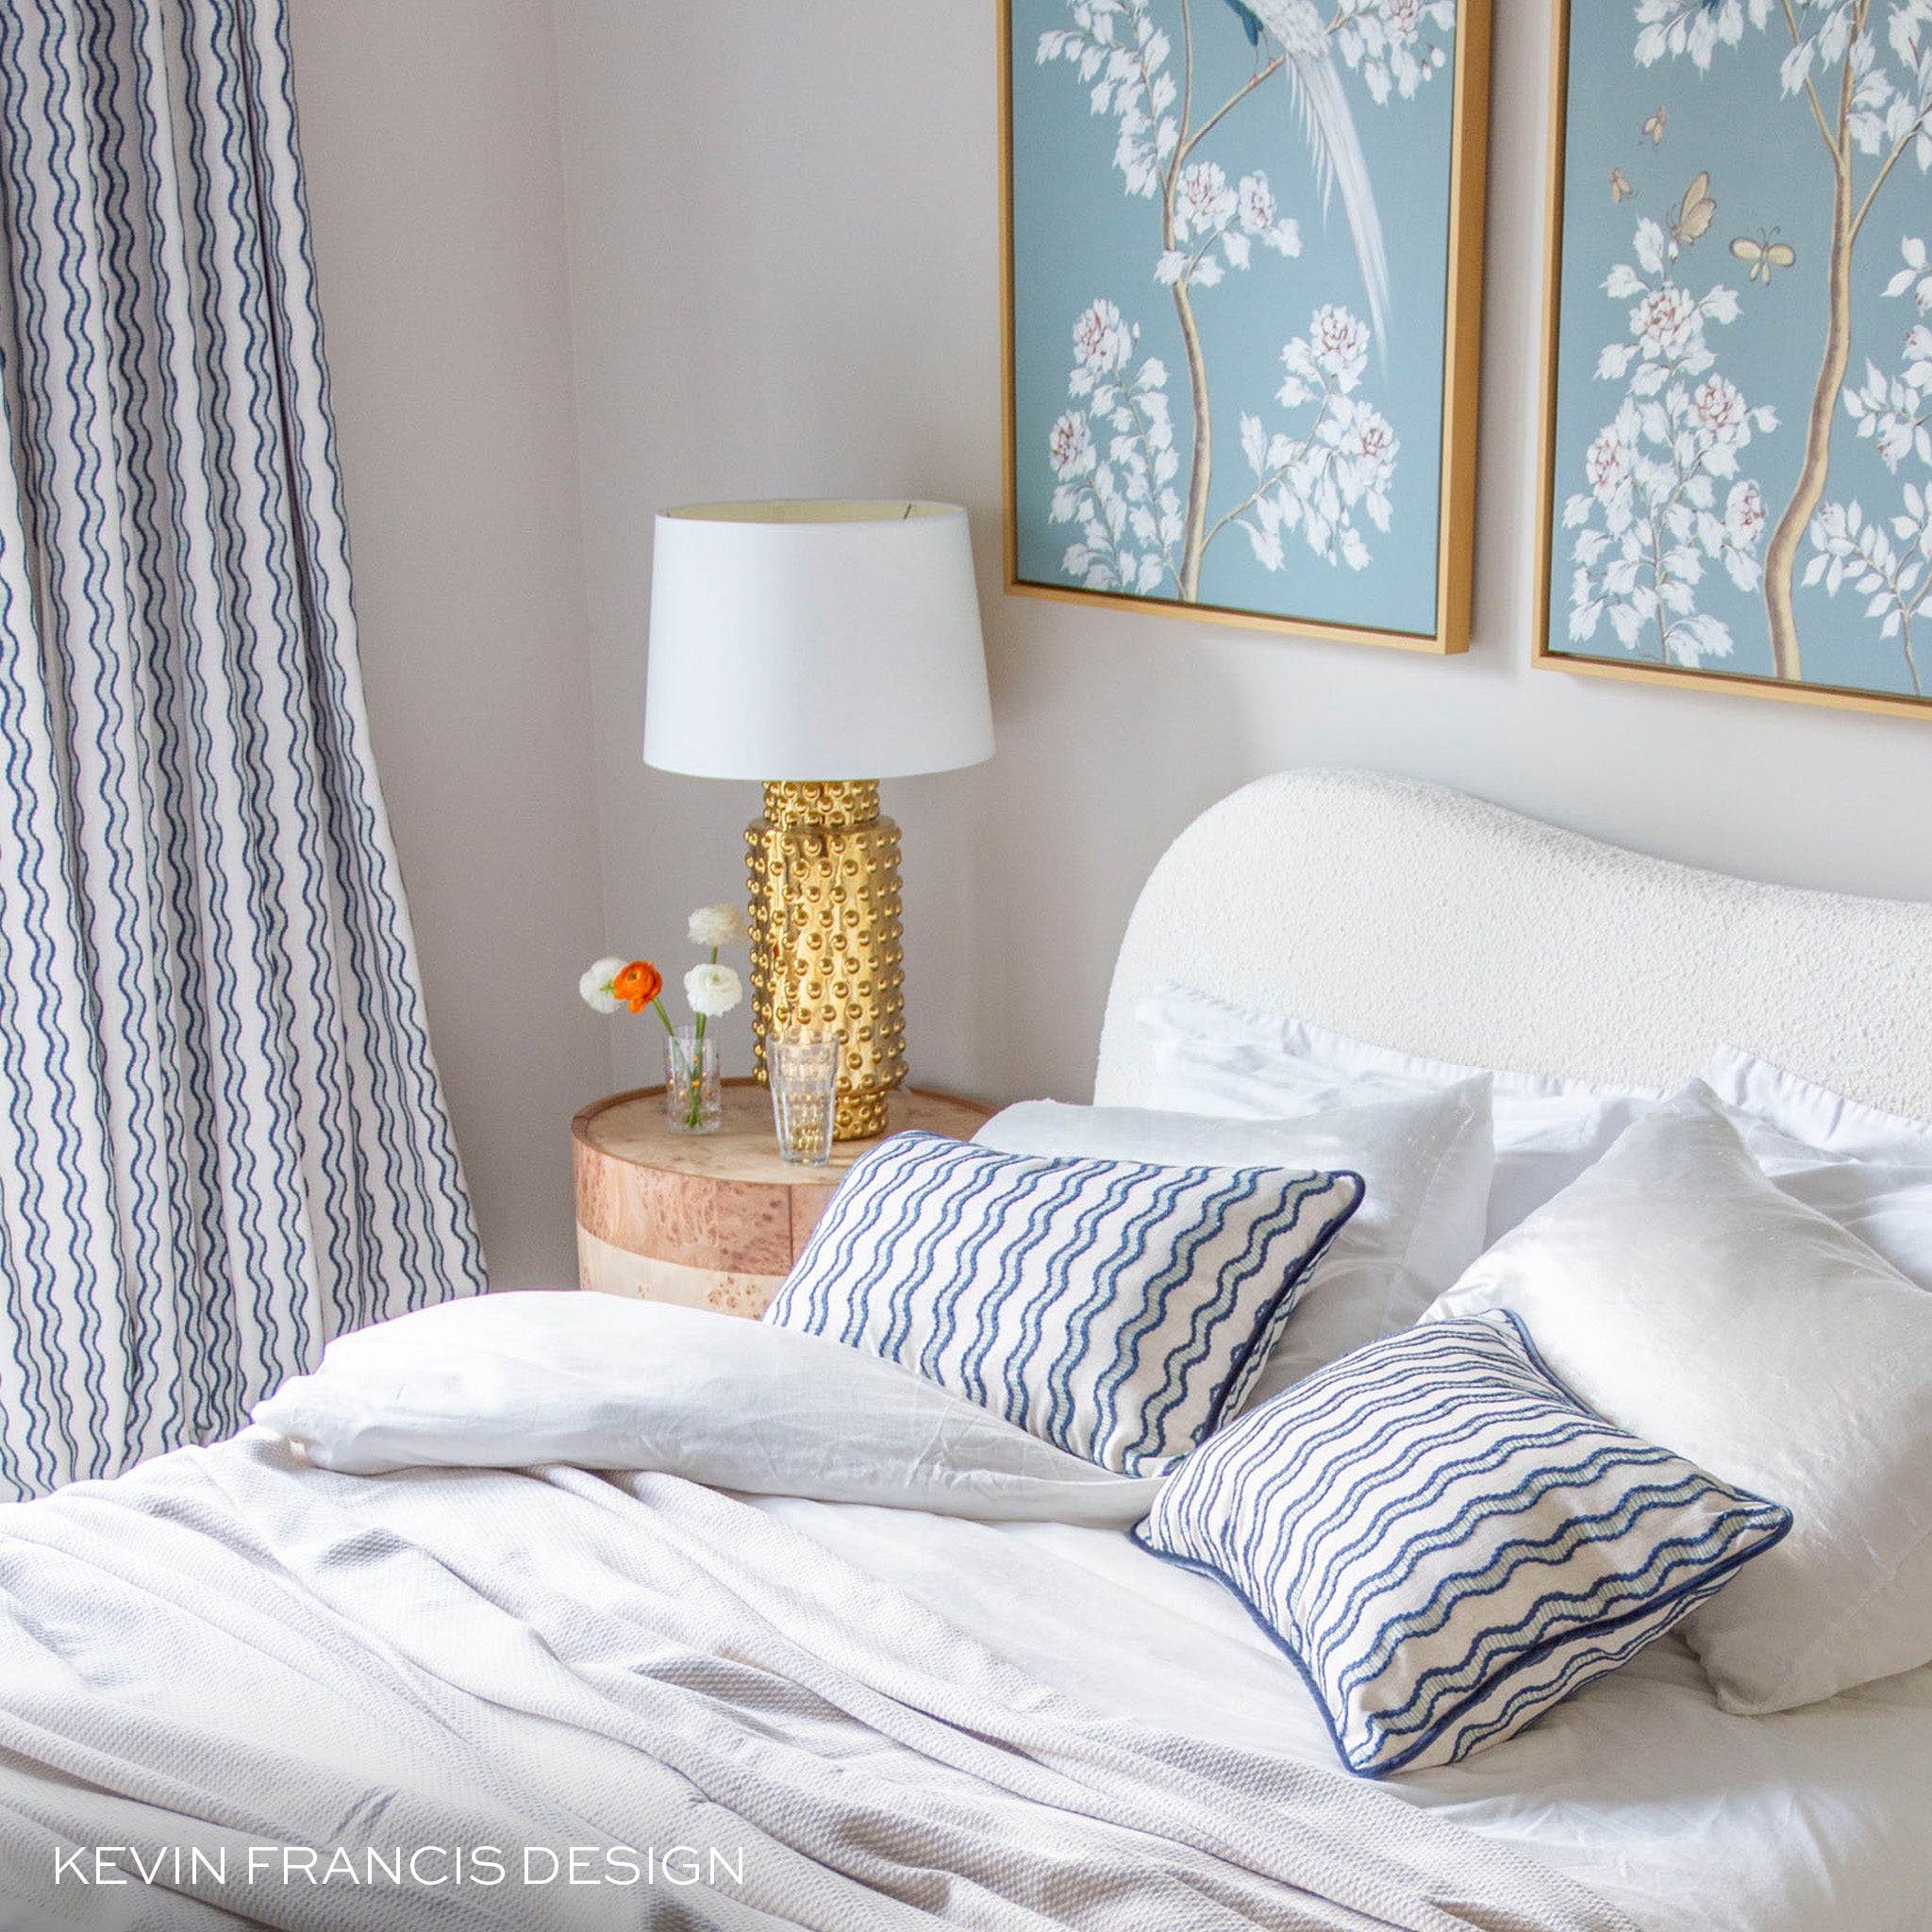 embroidered cream with navy wavy blue lines curtains and pillows in a bed room with blue and white floral artwork on the walls